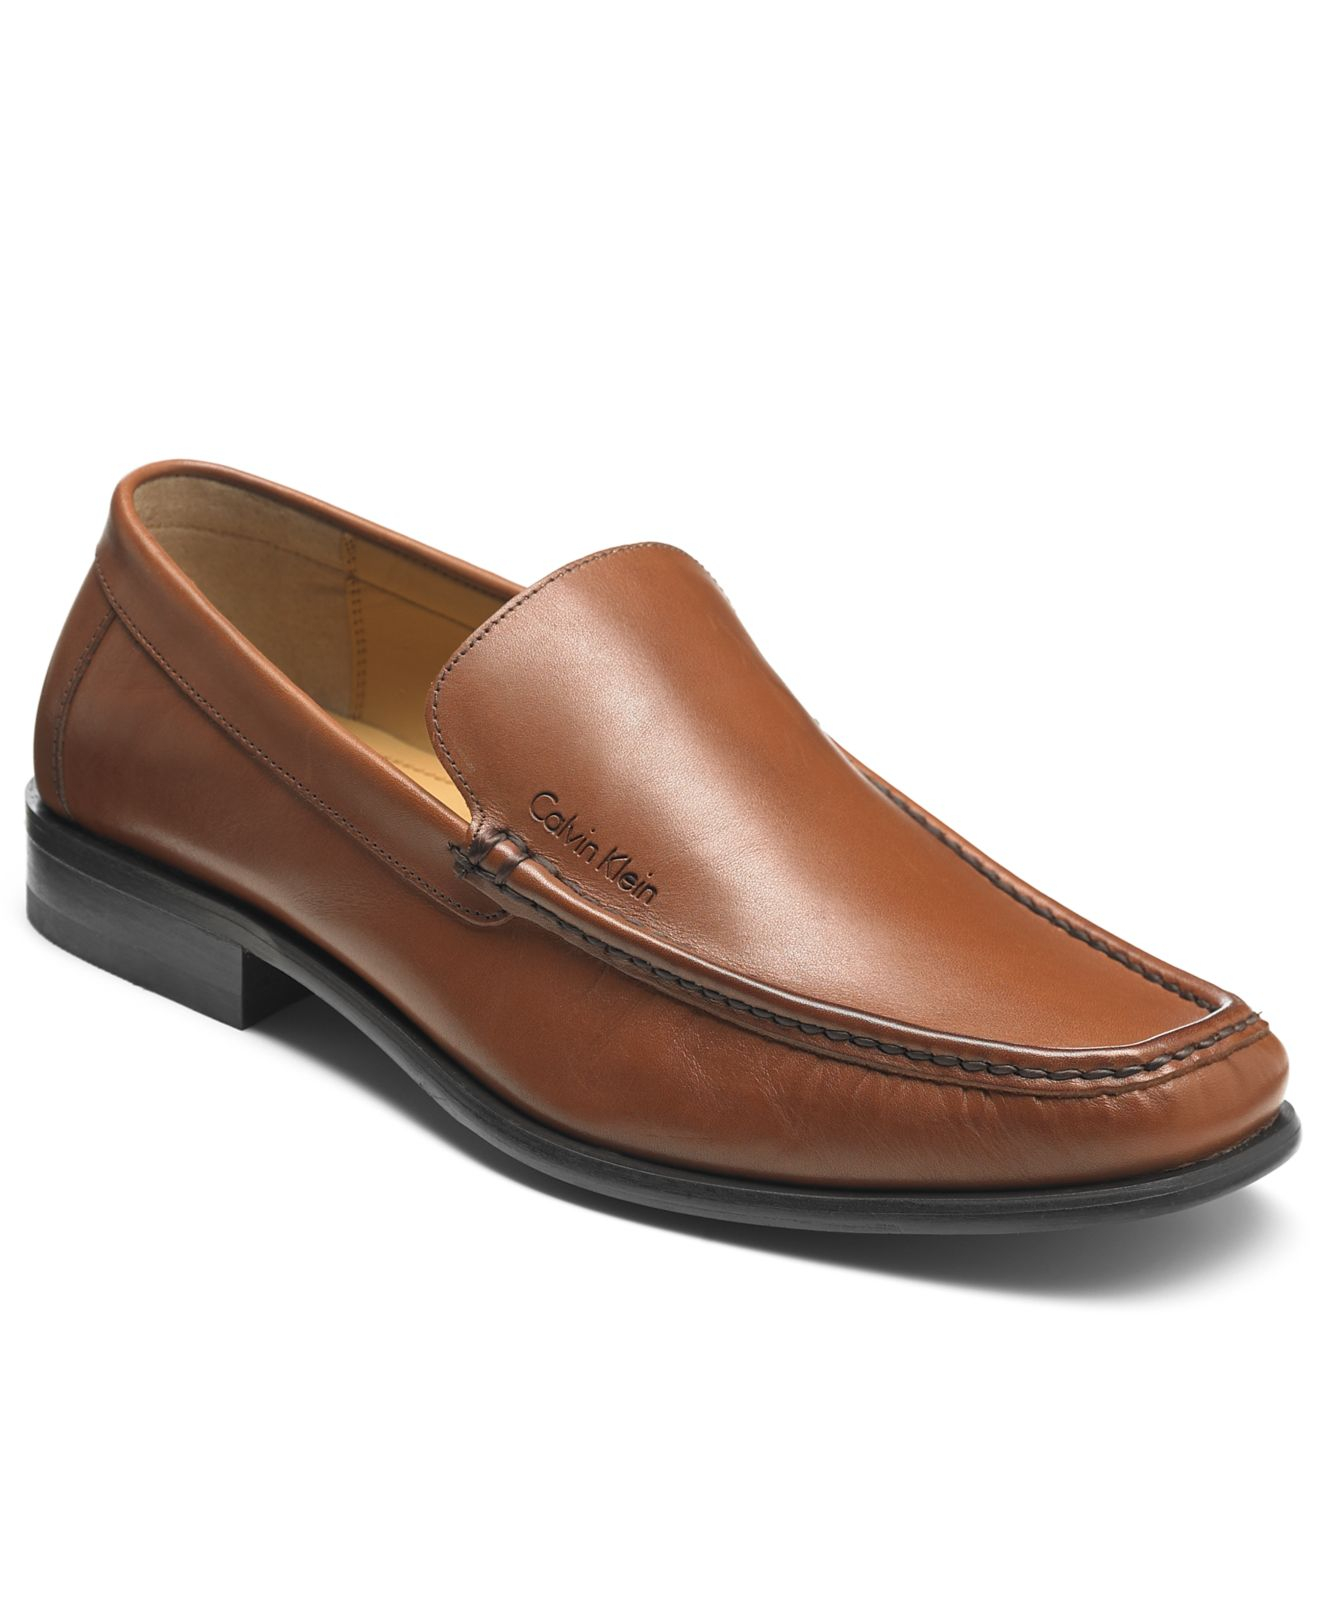 Lyst - Calvin Klein Neil Loafers in Brown for Men